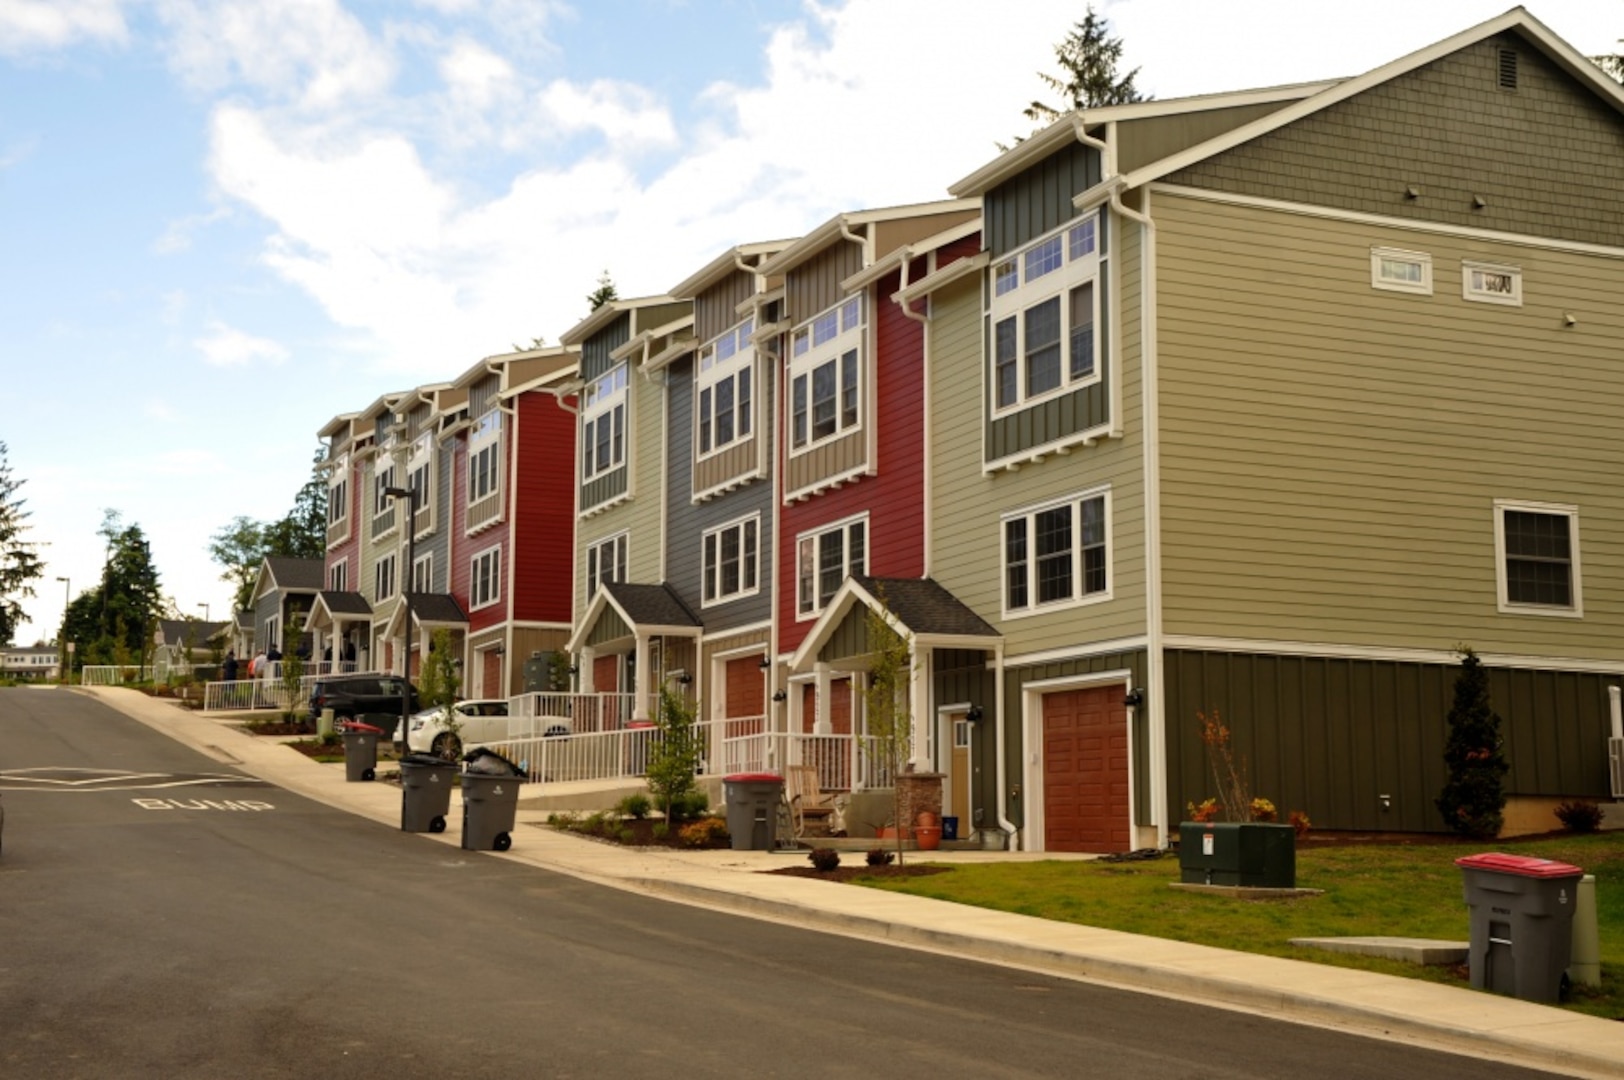 Twelve new housing units have been added to Culp Court within the Coast Guard Triumph Housing Complex in Astoria, Ore., and families can begin moving in June 27, 2019.

The 12 new units plus a maintenance and operations building complete phase II of a housing project that has cost a total of $19.3 million to complete.

U.S. Coast Guard photo by Petty Officer 3rd Class Trevor Lilburn.